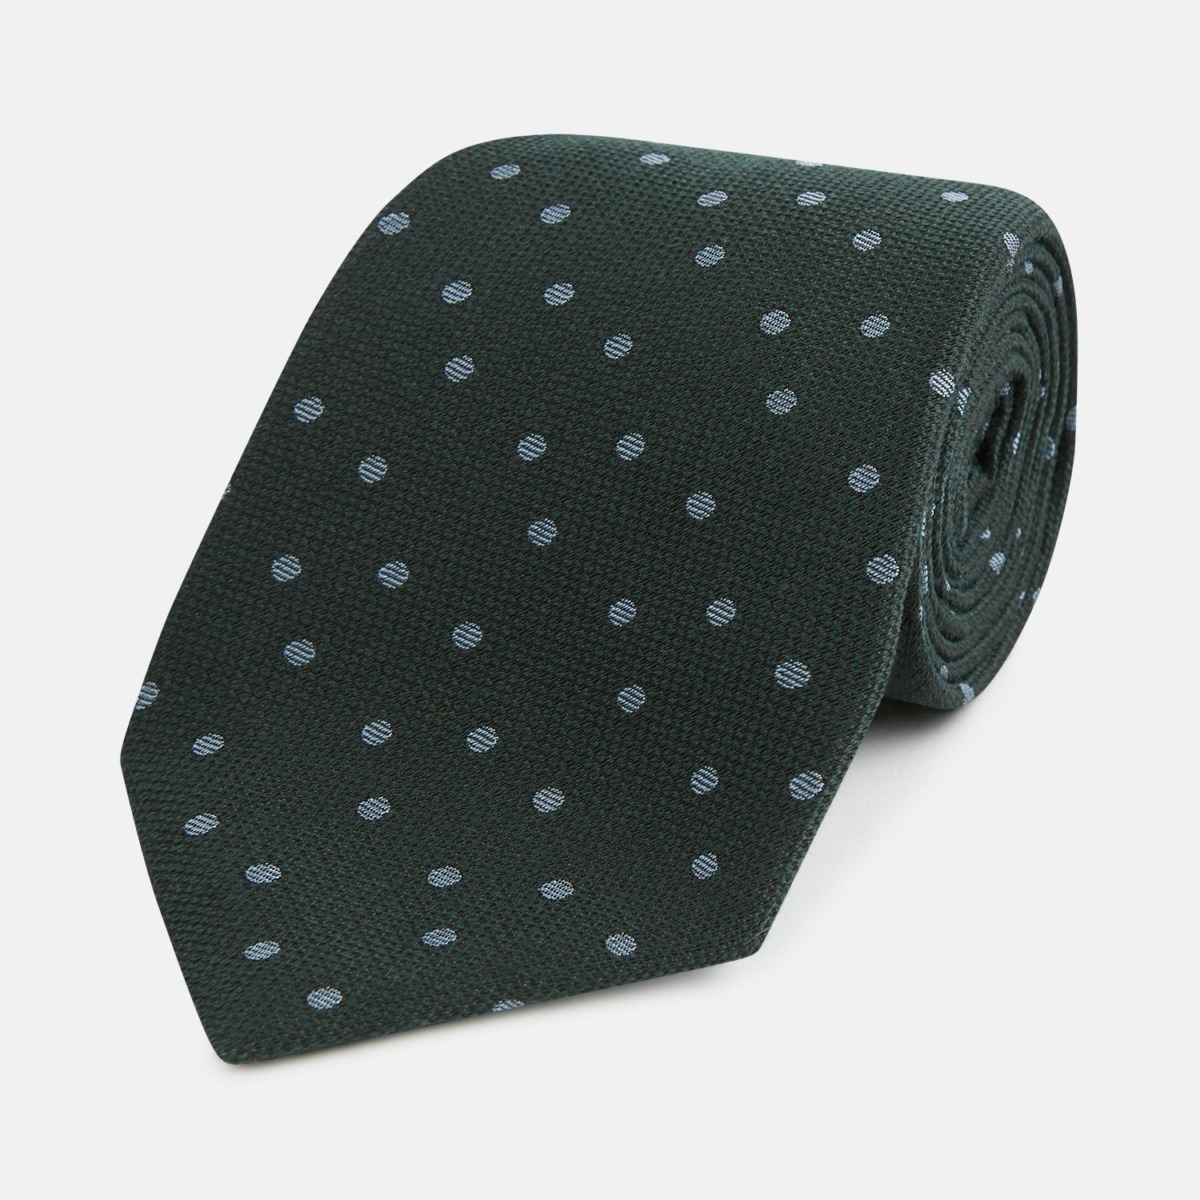 Turnbull And Asser Man Tie Green by Turnbull & Asser GOOFASH